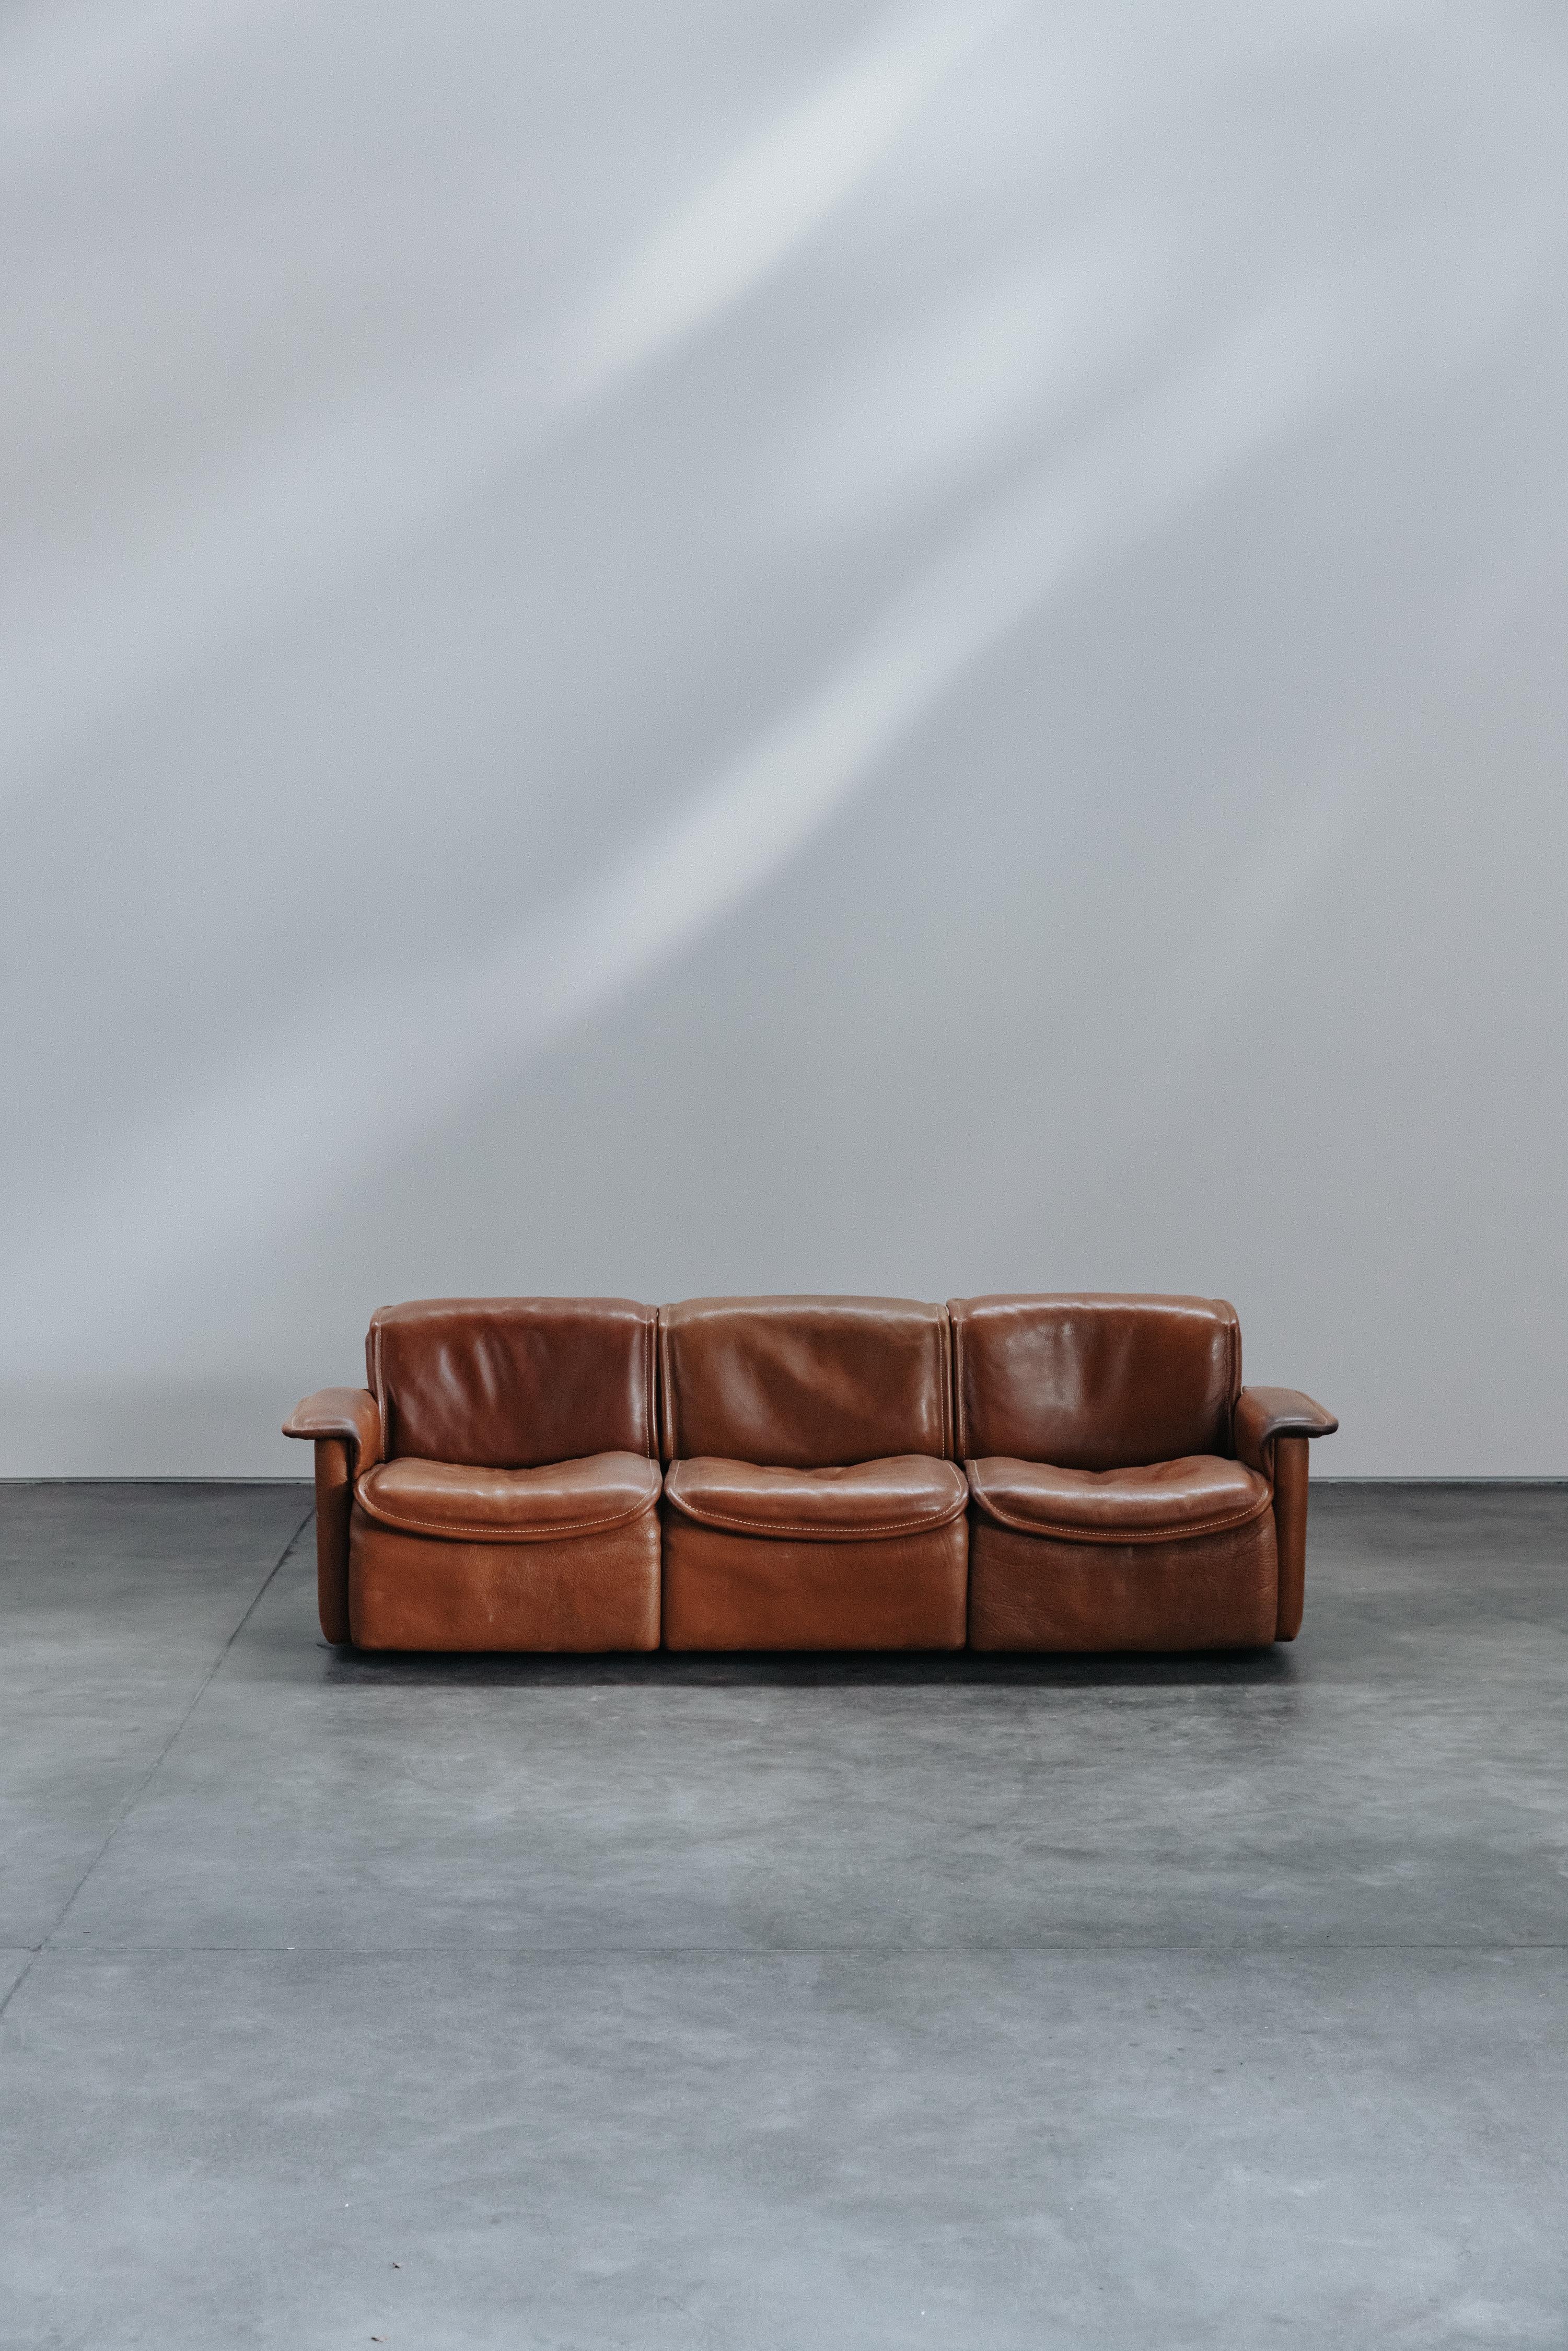 Vintage De Sede DS-12 Sofa From Switzerland, Circa 1970.    Original cognac leather upholstery with fantastic patina and wear.